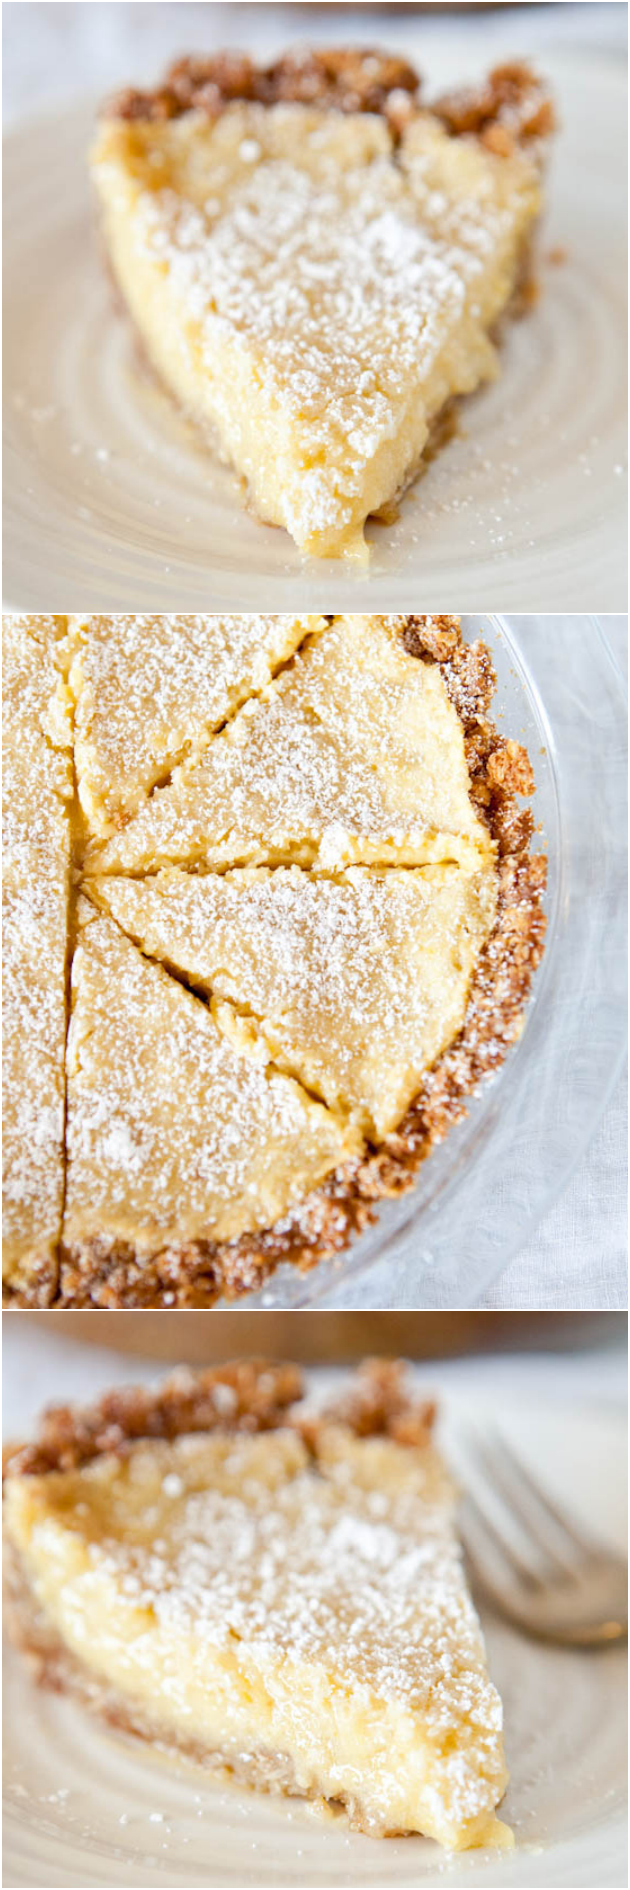 Crack Pie — This recipe lives up to its name and everyone should try this pie at least once!! It’s a fairly involved recipe from Christina Tosi’s Momofuku Milk Bar cookbook, but I promise the effort is worth it! 